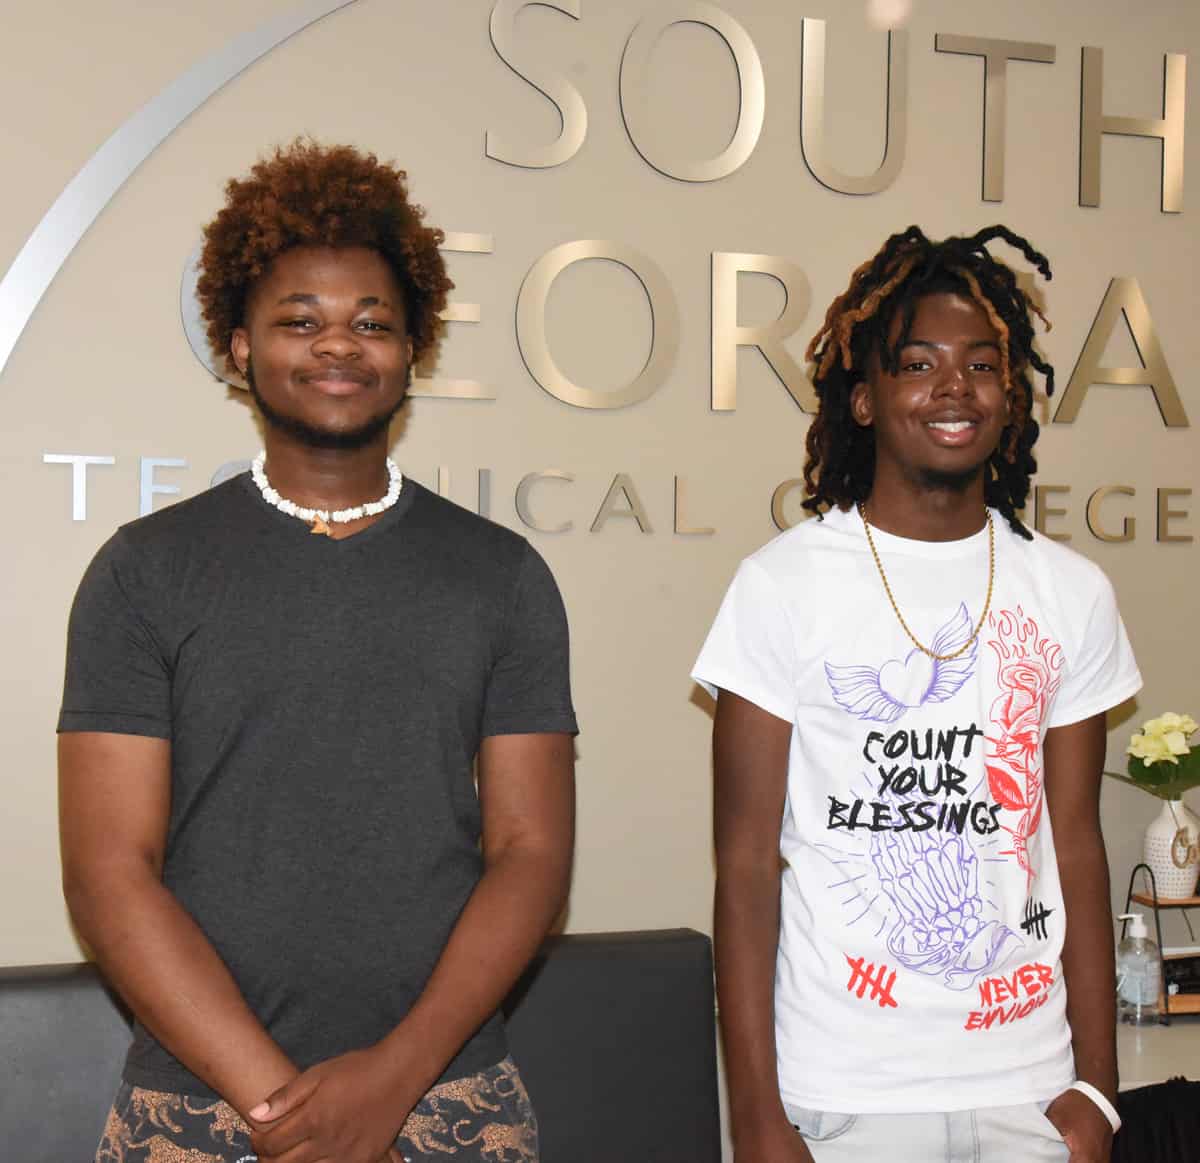 Shown above are REACH Scholars Ty’Quillious Mohone of Eatonton and Kanarvious Turner of Unadilla, who are currently enrolled in South Georgia Technical College this summer.